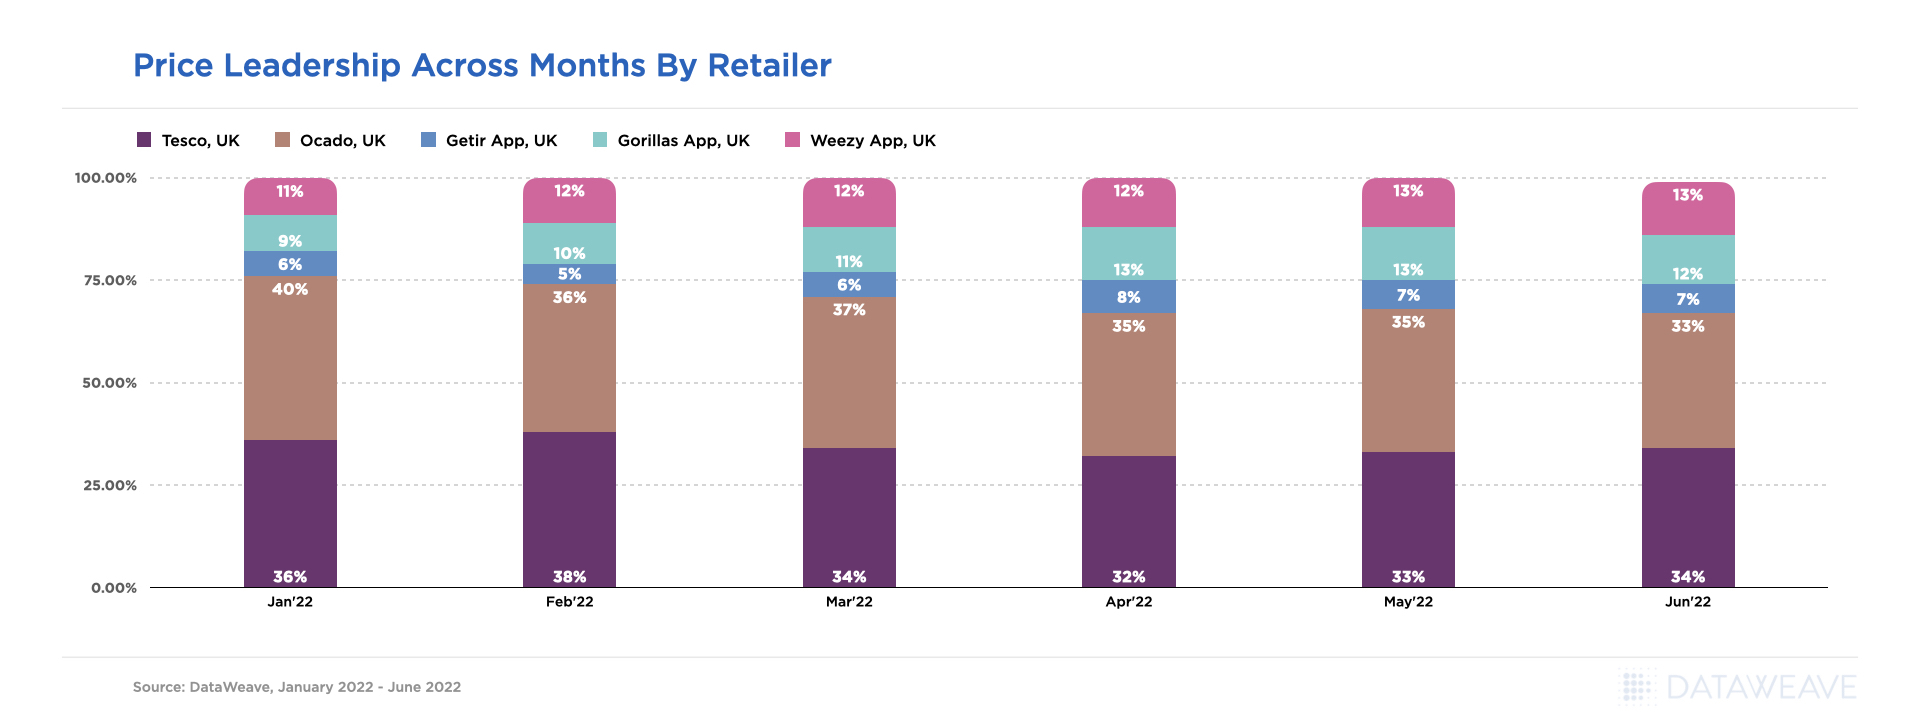 Price leadership across months by Retailer